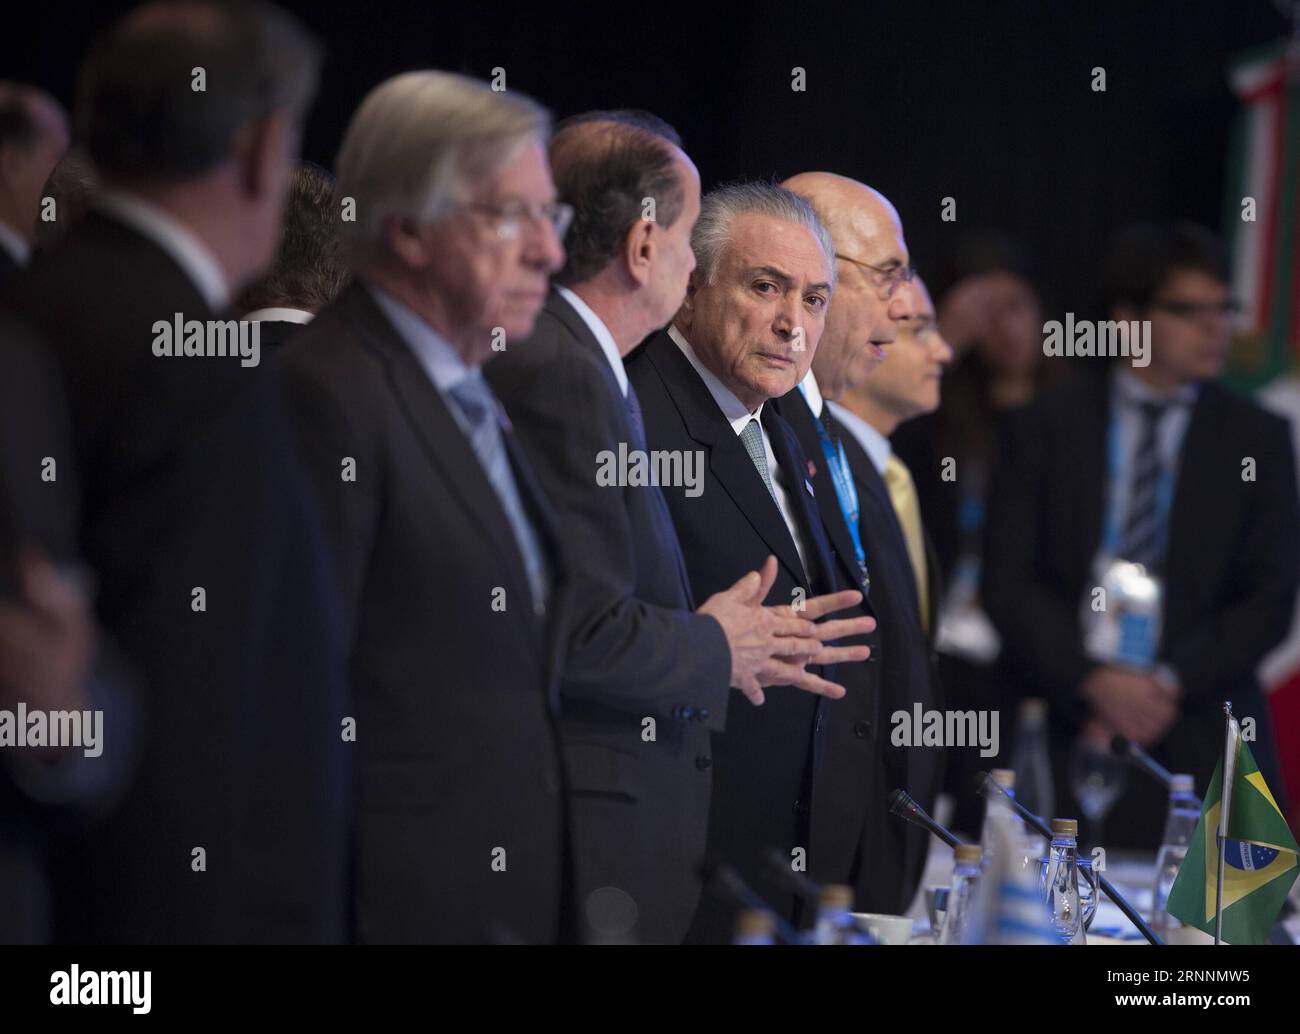 (170722) -- MENDOZA, July 22, 2017 -- President of Brazil Michel Temer (4th L) attends the Presidents meeting during the Summit of Heads of States of the Southern Common Market (Mercosur) and Associated States, in the city of Mendoza, Argentina, on July 21, 2017. Members of the Southern Common Market (Mercosur) trade bloc seek to recover the group s trade dynamism by boosting free trade among themselves and with other regions, a senior Argentine official said Friday. Martin Zabala) (ma)(gj) ARGENTINA-MENDOZA-MERCOSUR-SUMMIT e MARTINxZABALA PUBLICATIONxNOTxINxCHN   Mendoza July 22 2017 Presiden Stock Photo